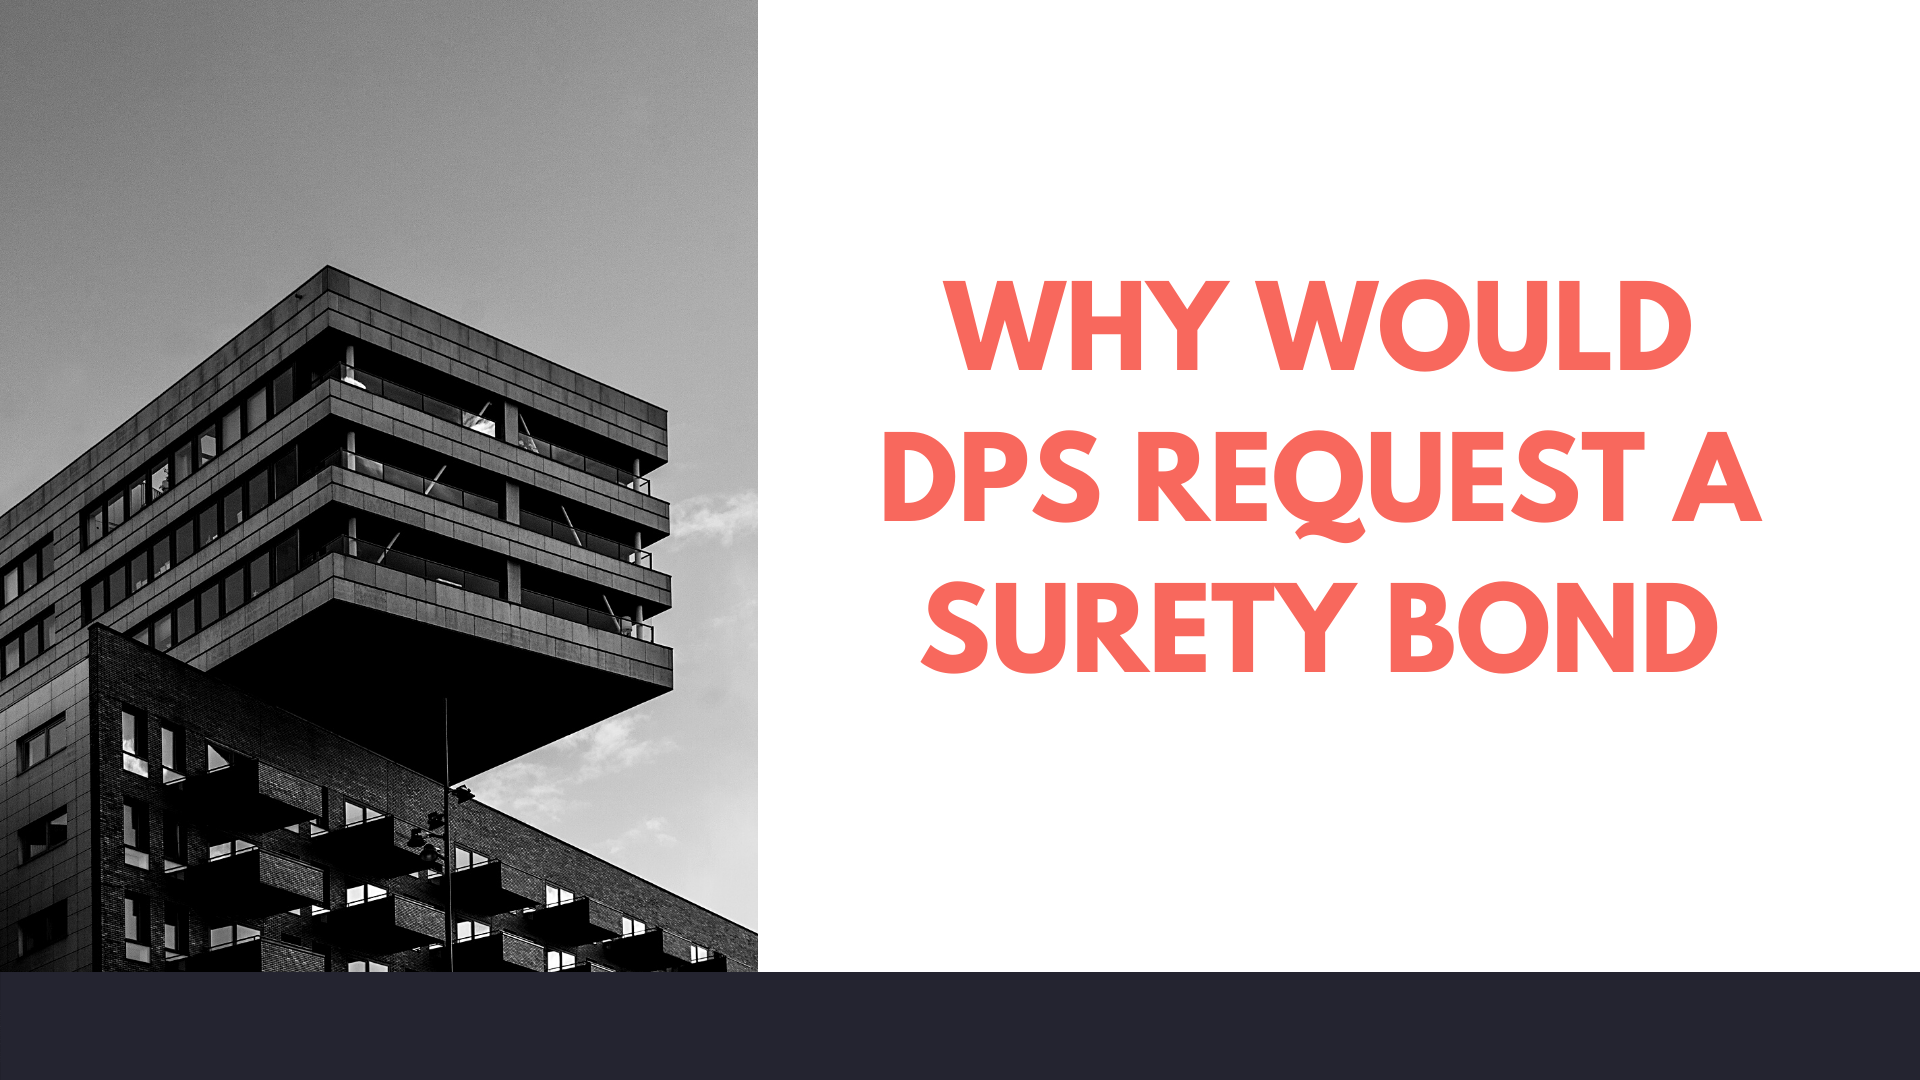 surety bond - What does DPS mean - building